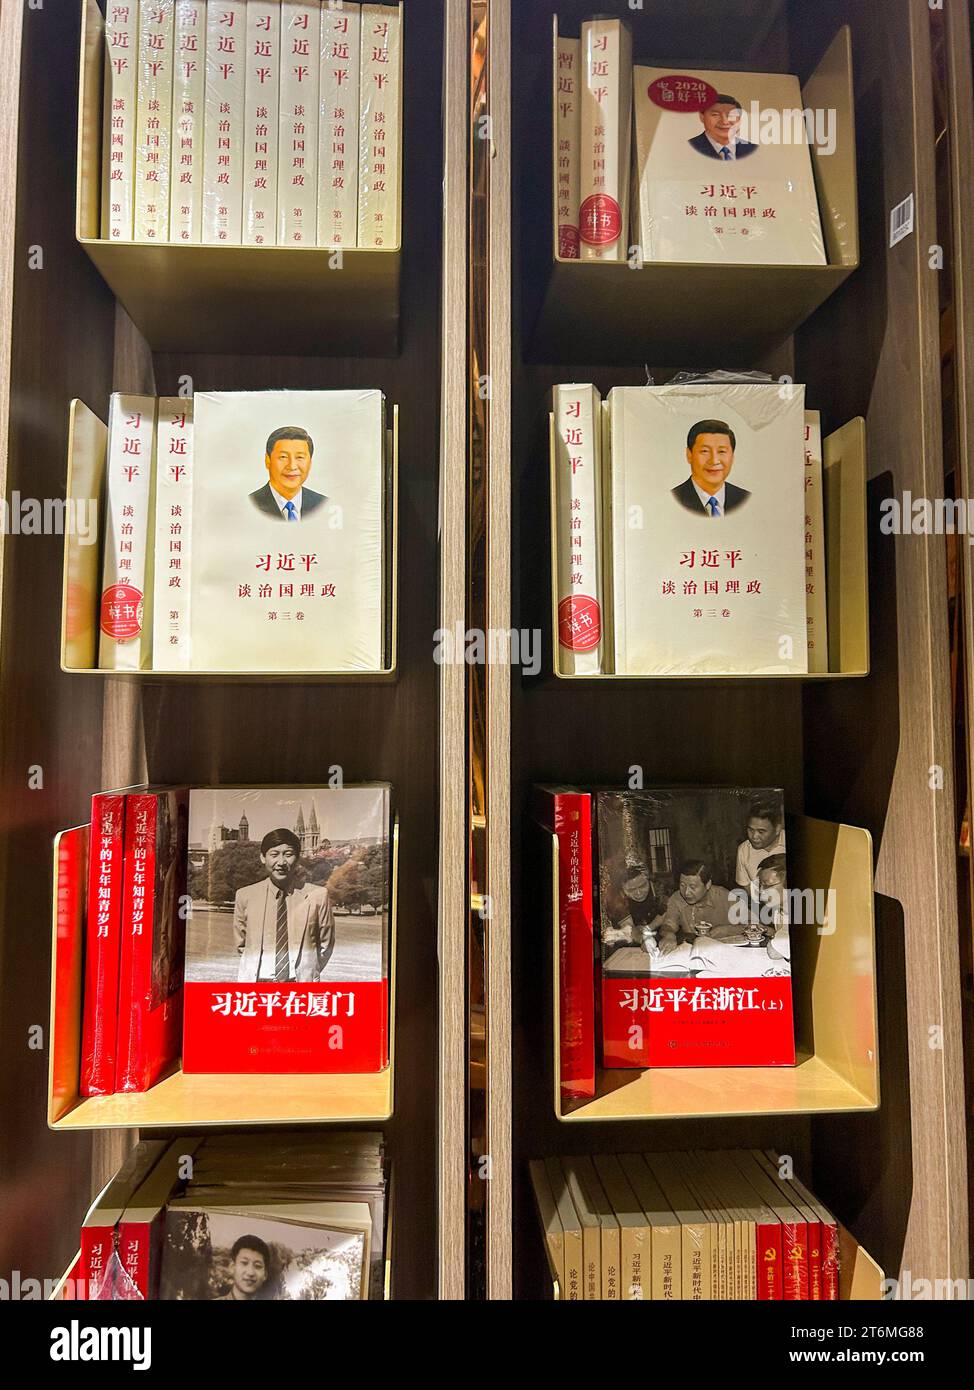 Pechino, Cina, dettaglio, Books on display, grande magazzino francese "Galeries Lafayette " libreria cinese, presidente Xi libro "Xi Jinping's Thoughts on a well-off Society" Foto Stock